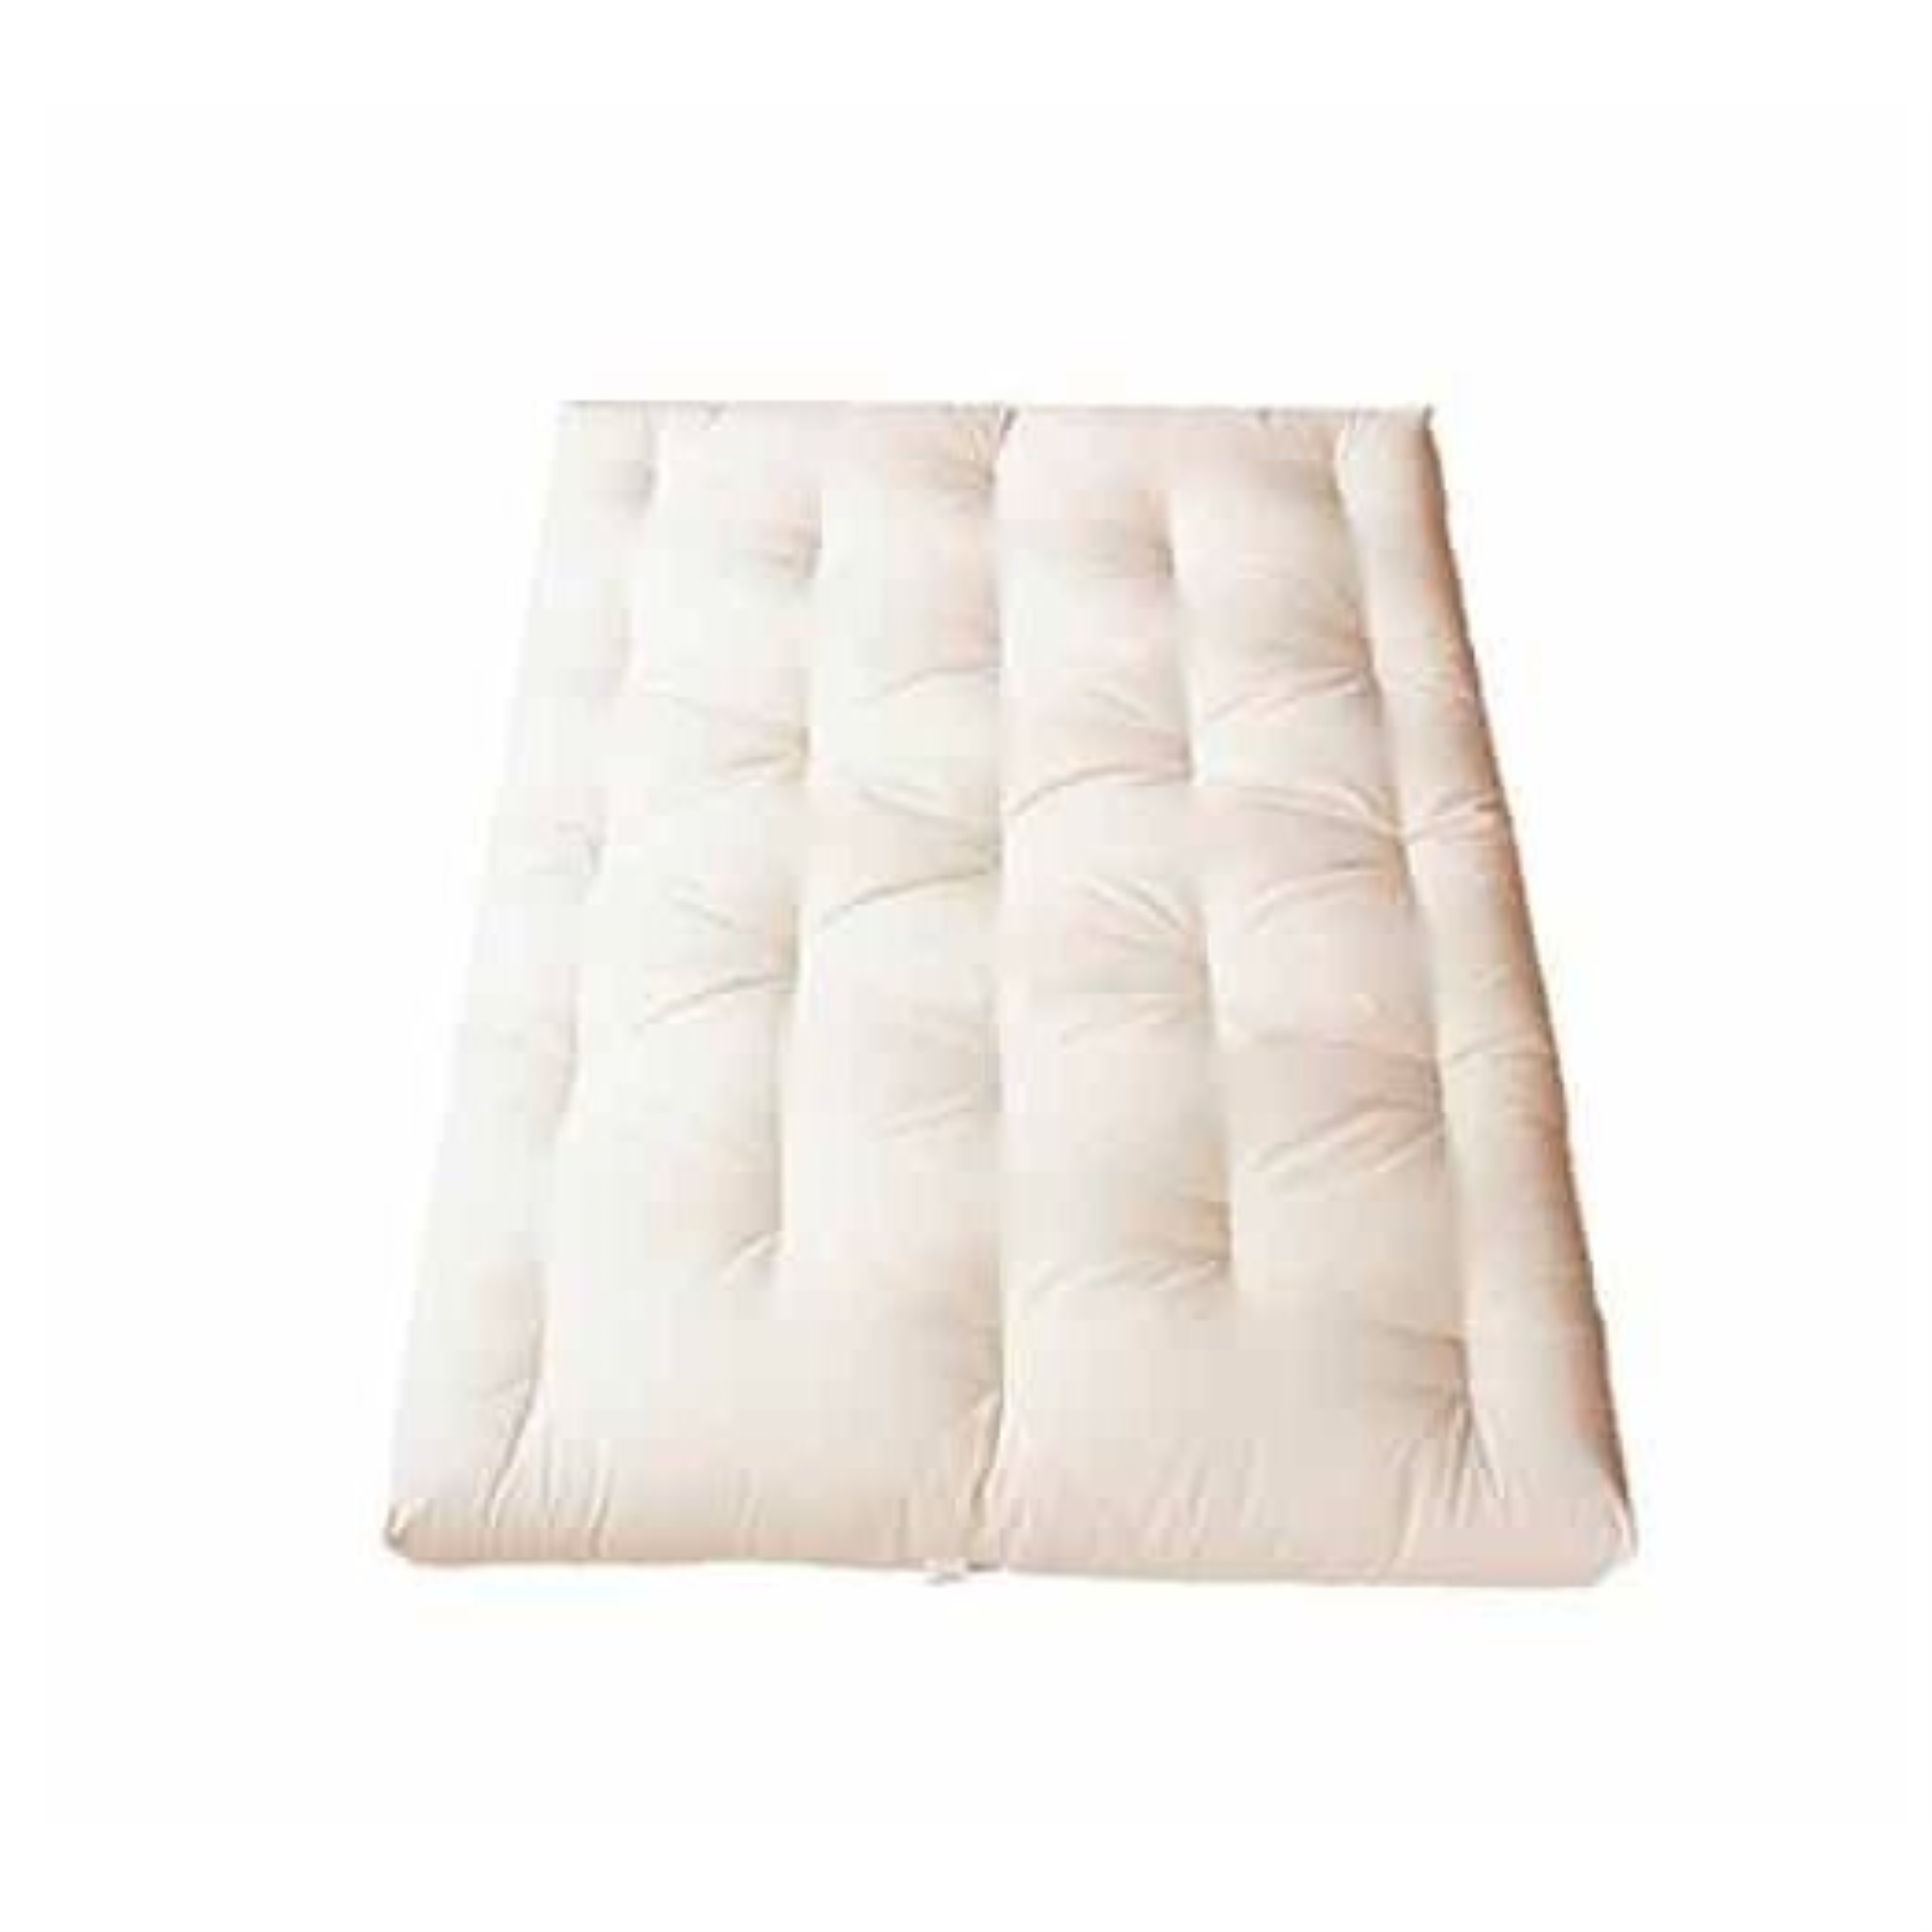 White Lotus Home Green Cotton  Cali King Mattress with 2" Foam core in 100% Cotton Fabric Case